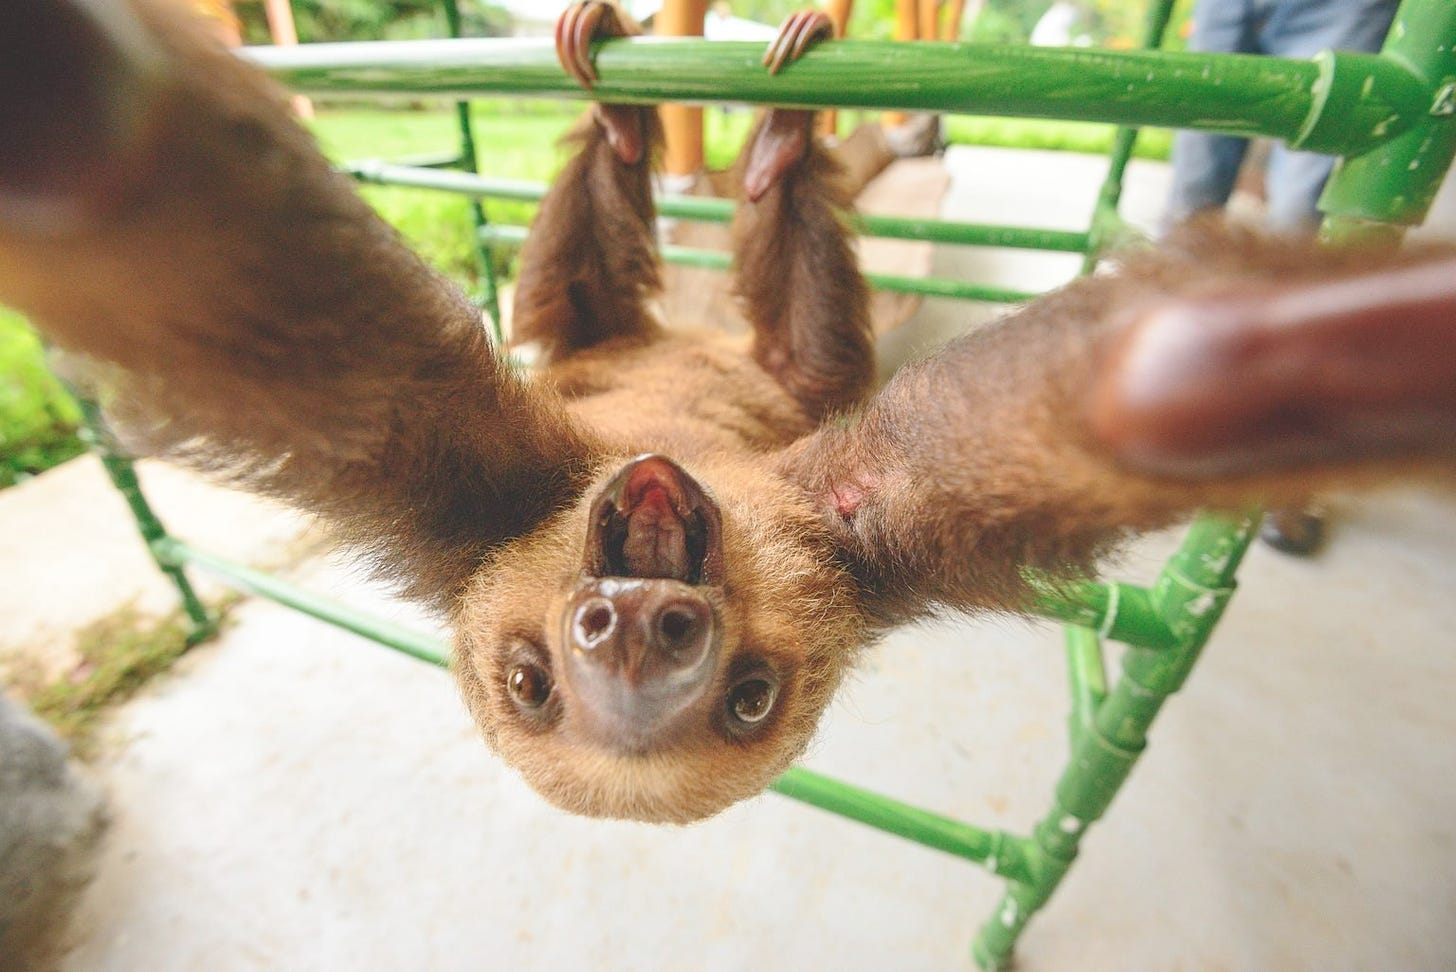 Image of cute sloth hanging upside down